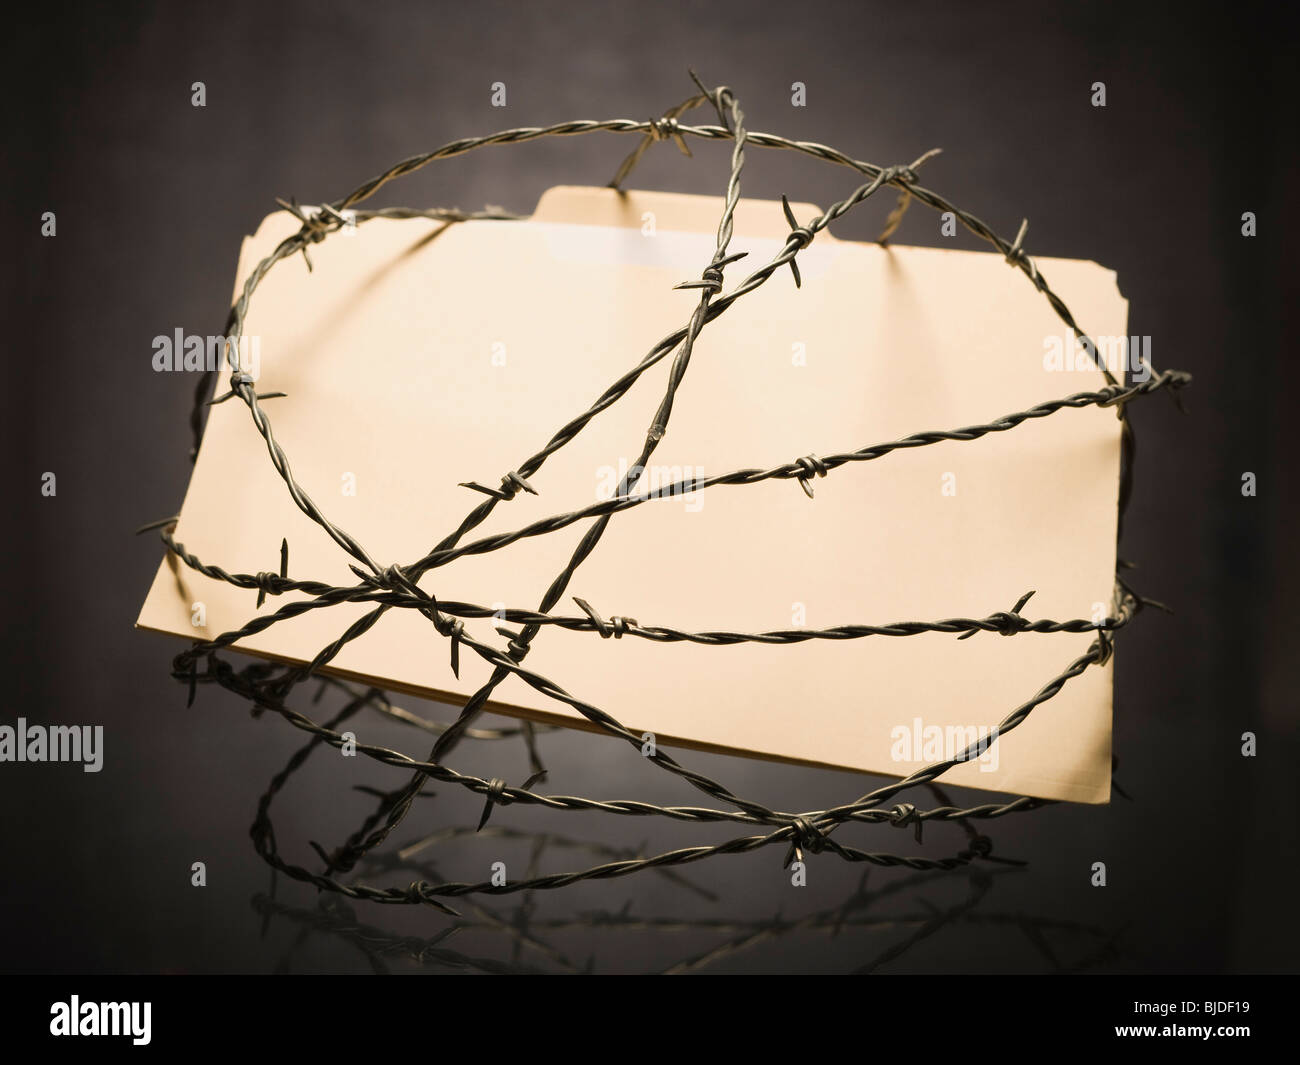 Manila file folder surrounded by barbed wire. Stock Photo